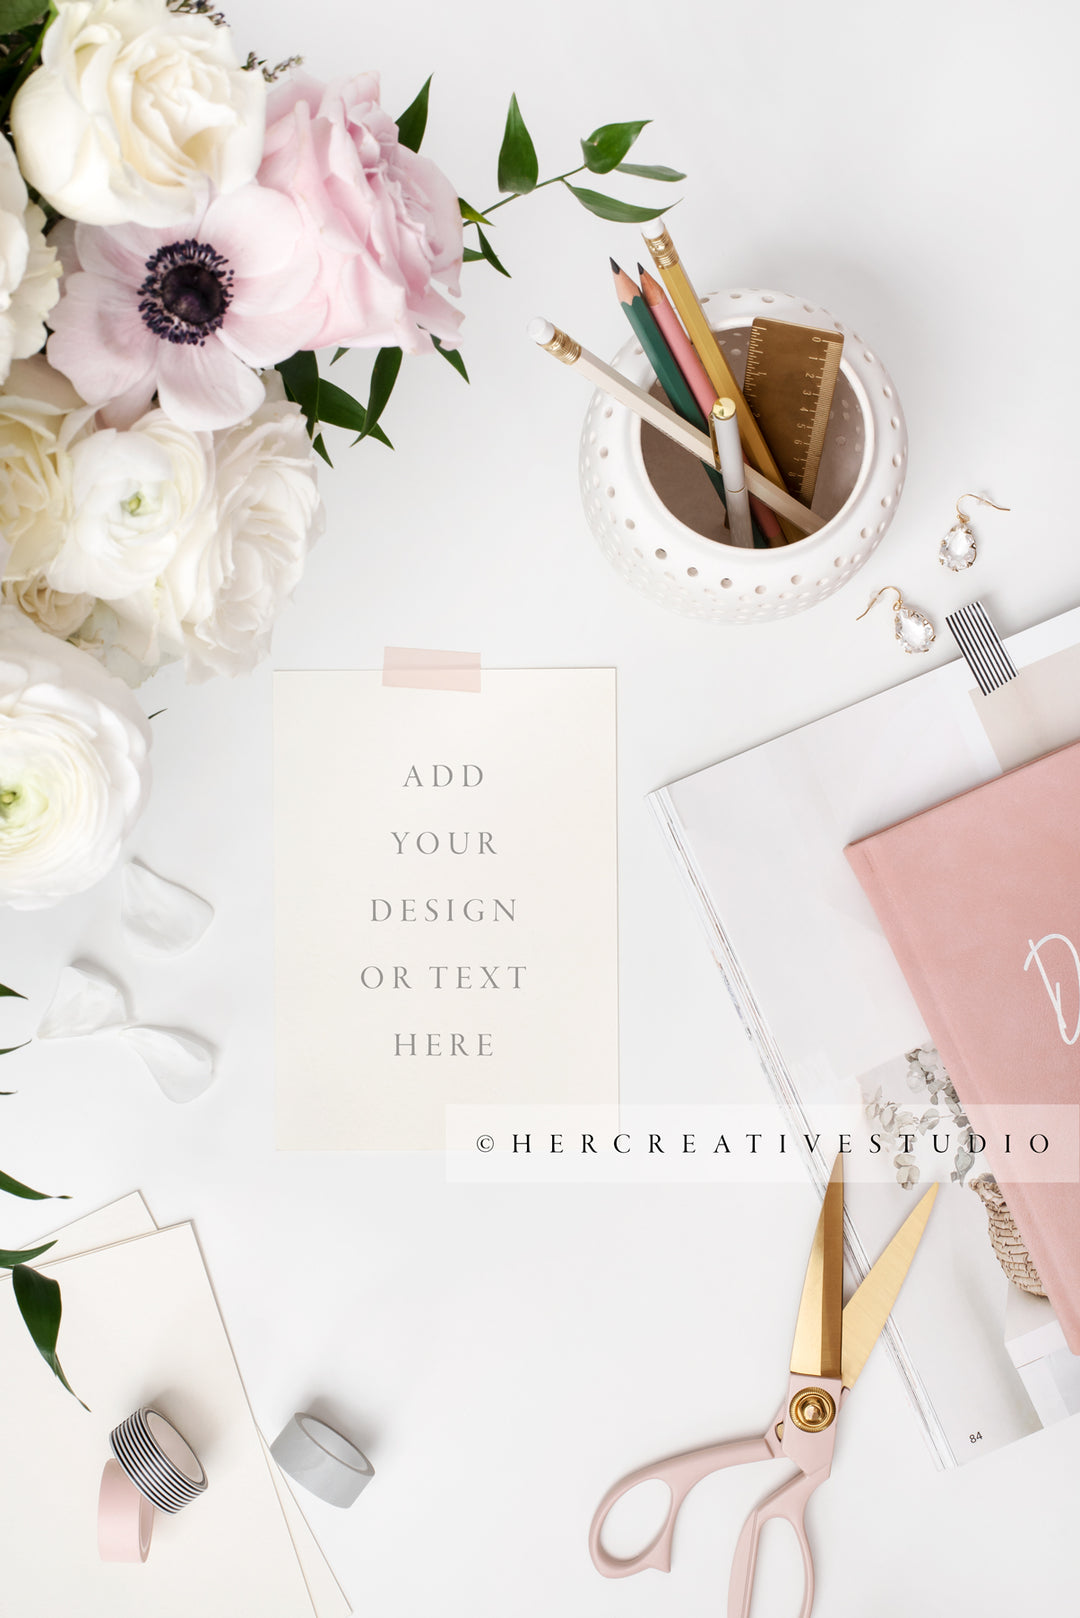 Stationery, Flowers & Pencils on Pretty Workspace, Styled Stock Image